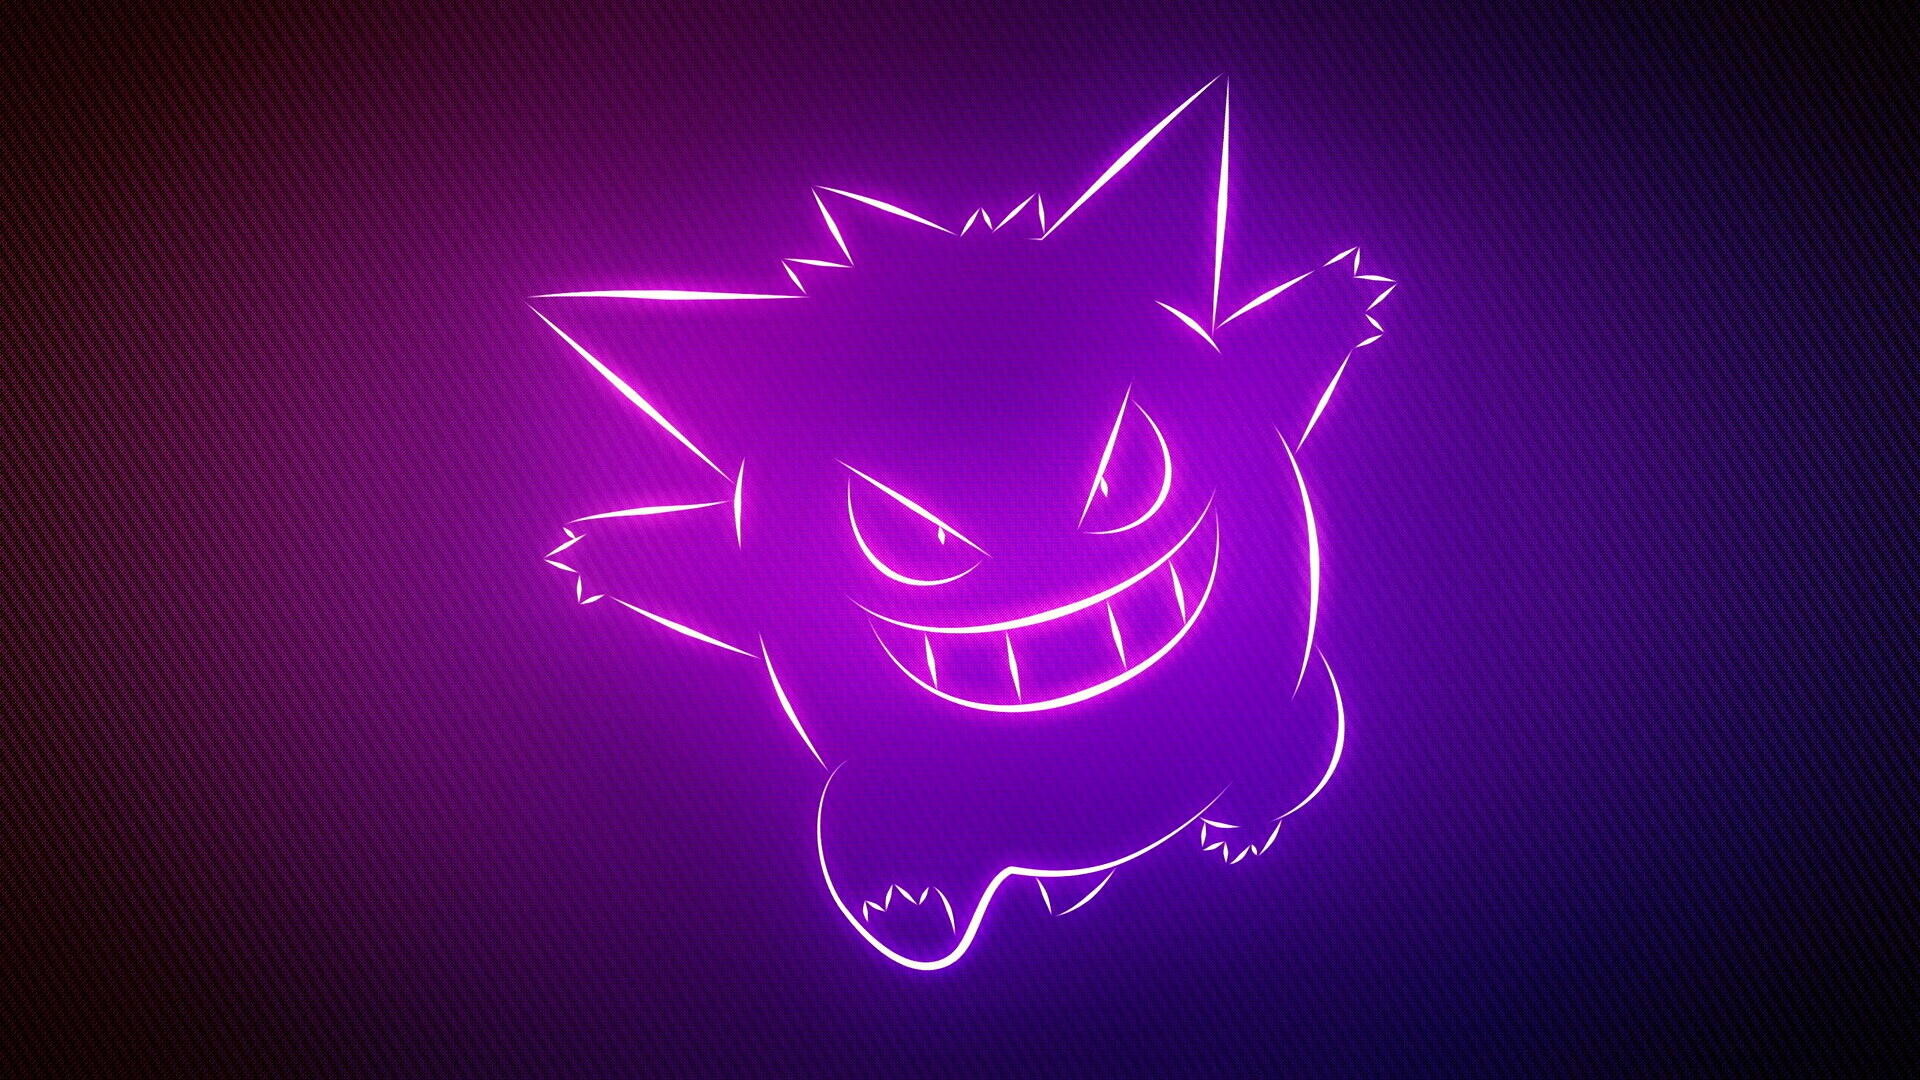 Gengar: Purple, Creatures of all shapes and sizes, Living in the wild or alongside their human partners. 1920x1080 Full HD Background.